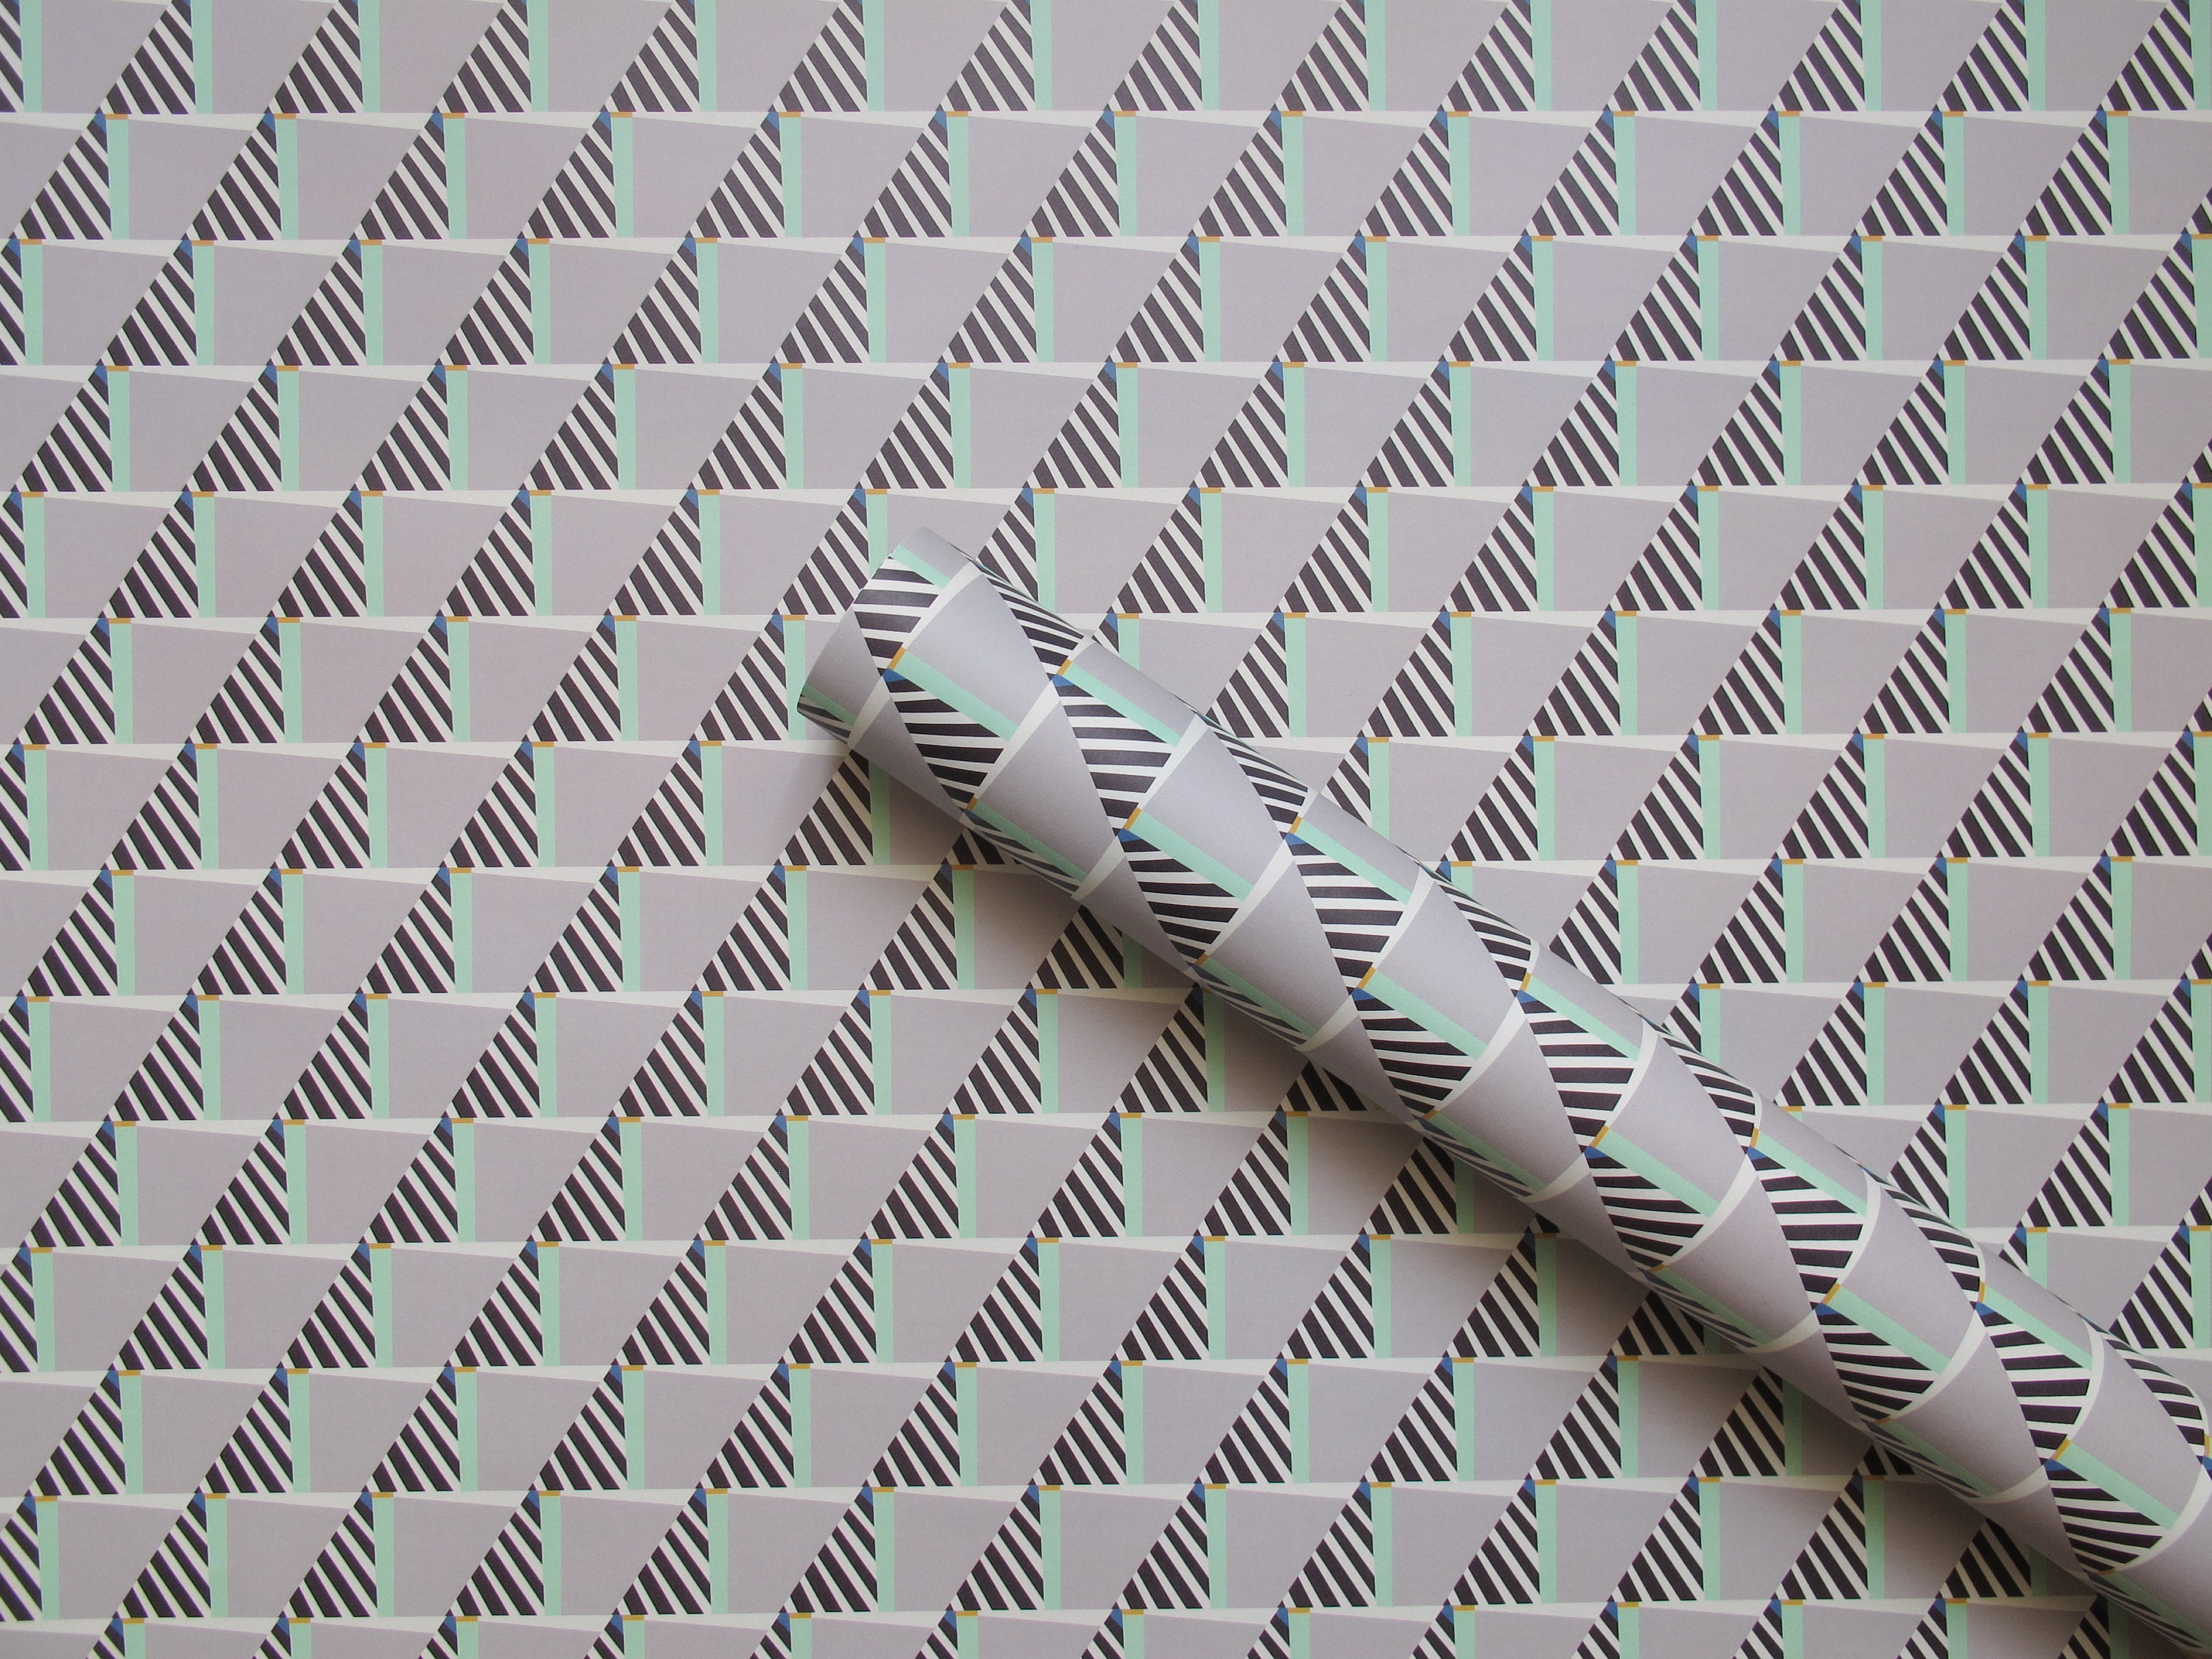 Hardcover Single Section Binding A5 Sketchbook 100gsm Fedrigoni Arcoprint  Blank Paper Bookcloth Cover 